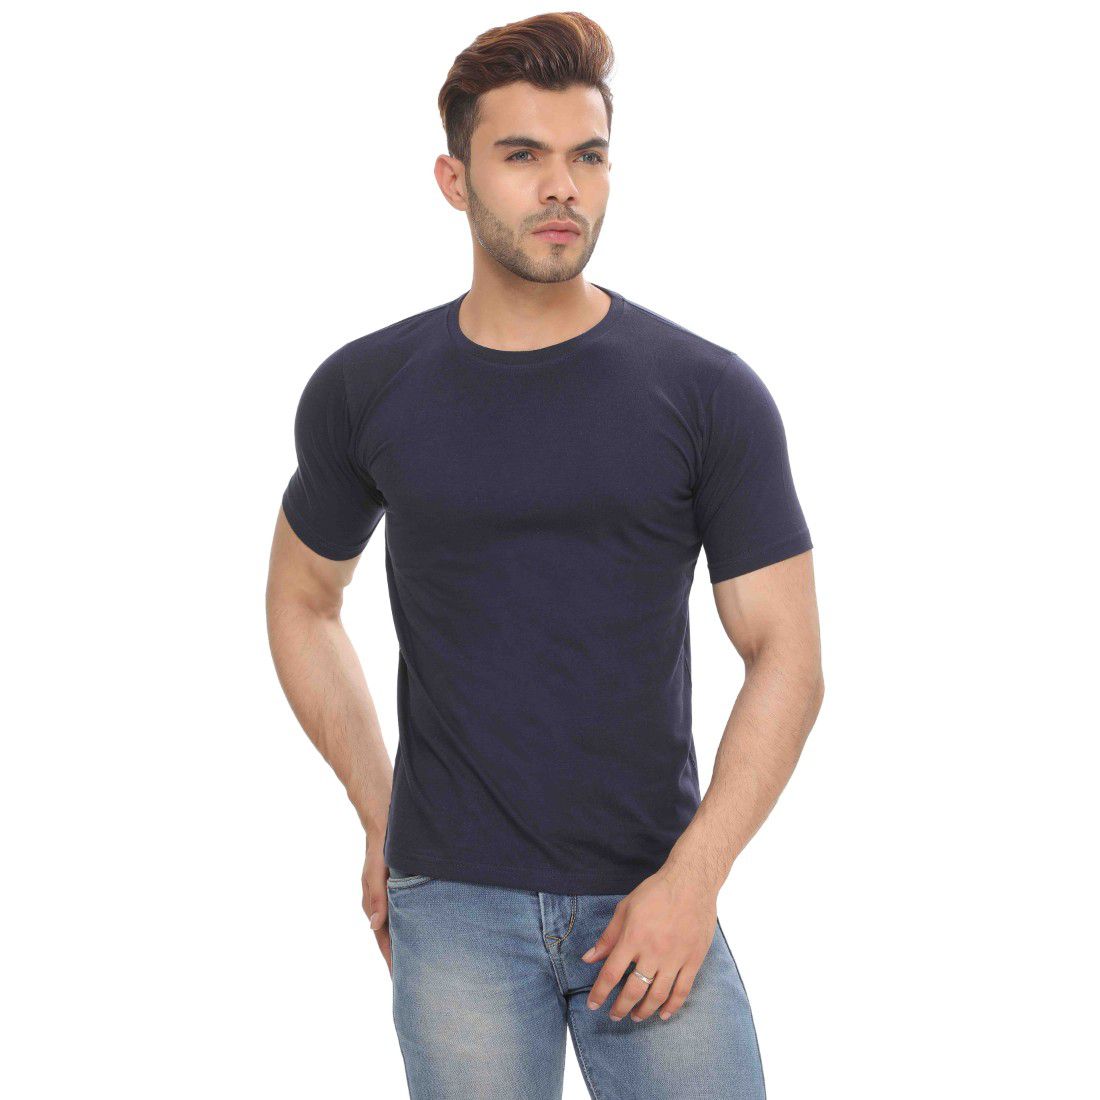 The Hex Navy Round T-Shirt - Buy The Hex Navy Round T-Shirt Online at ...